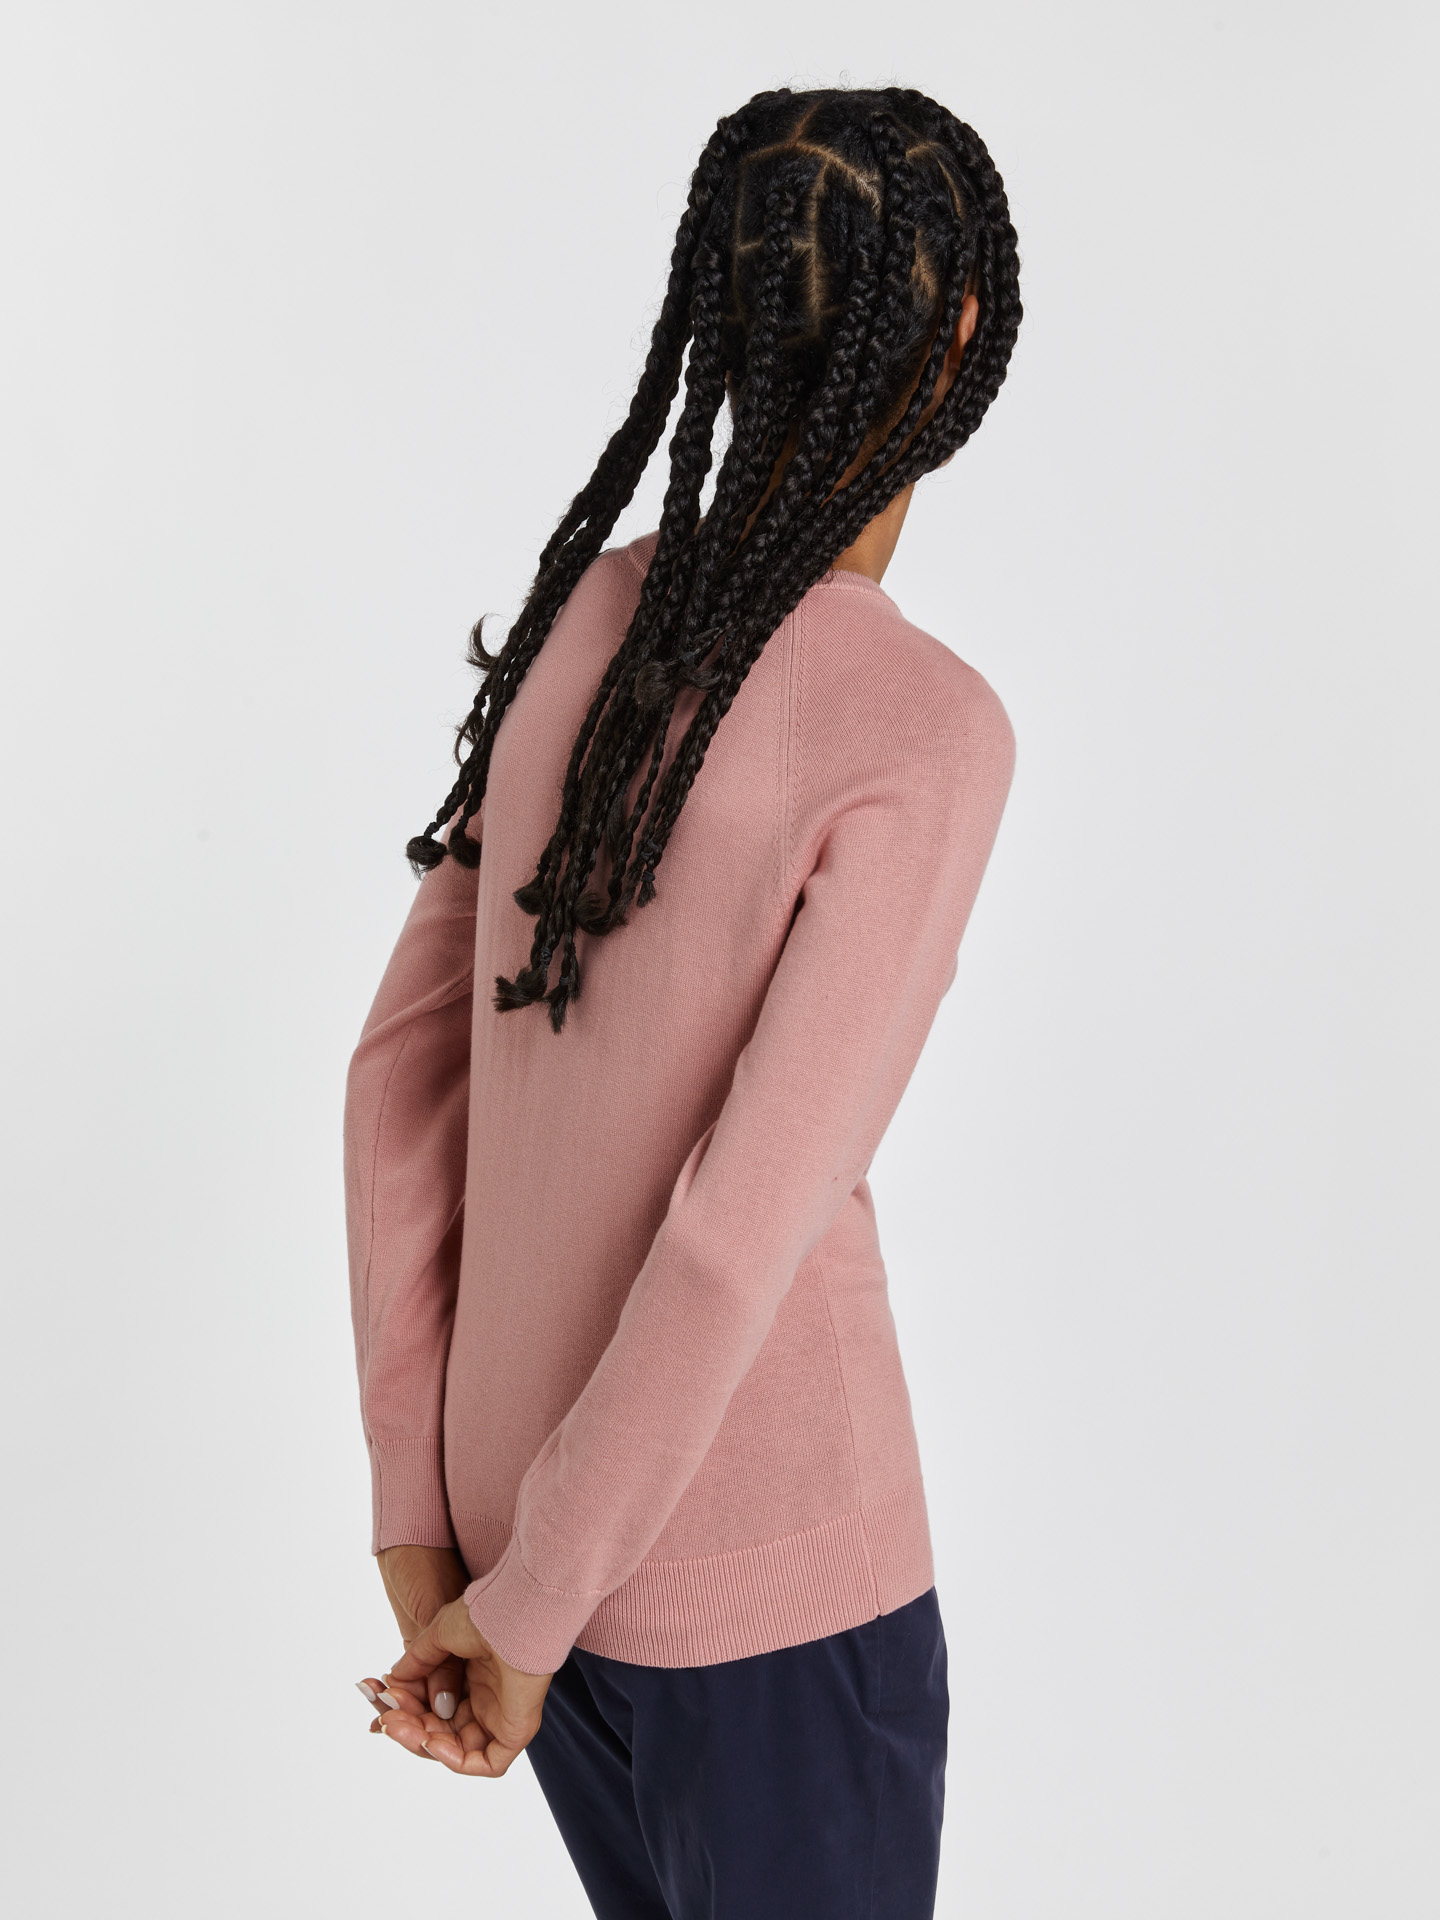 Sweater Light Pink Casual Woman